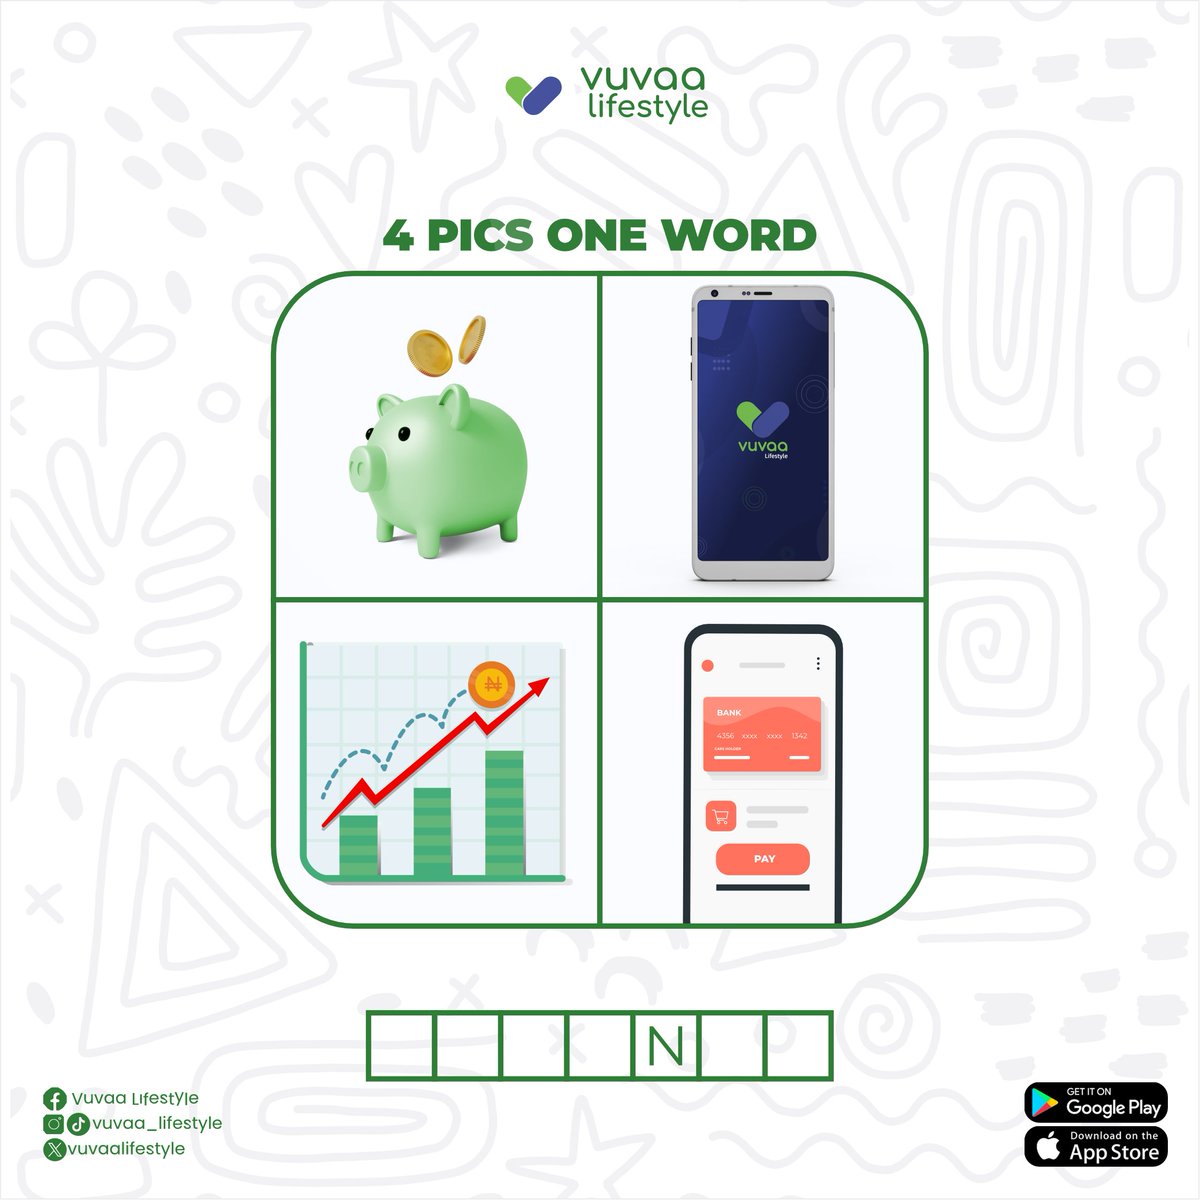 Can you crack the code and guess the word?🤔🧩

Share your answer in the comments below! 🕵️‍♂️🚀

#lifeissweetwithvuvaa Fuel 1200 Rain in January FULL LIST Twice as Tall Koko Zaria Nigerians Rufai Oseni Pablo Asher #vuvaalifestyle #4pics1word